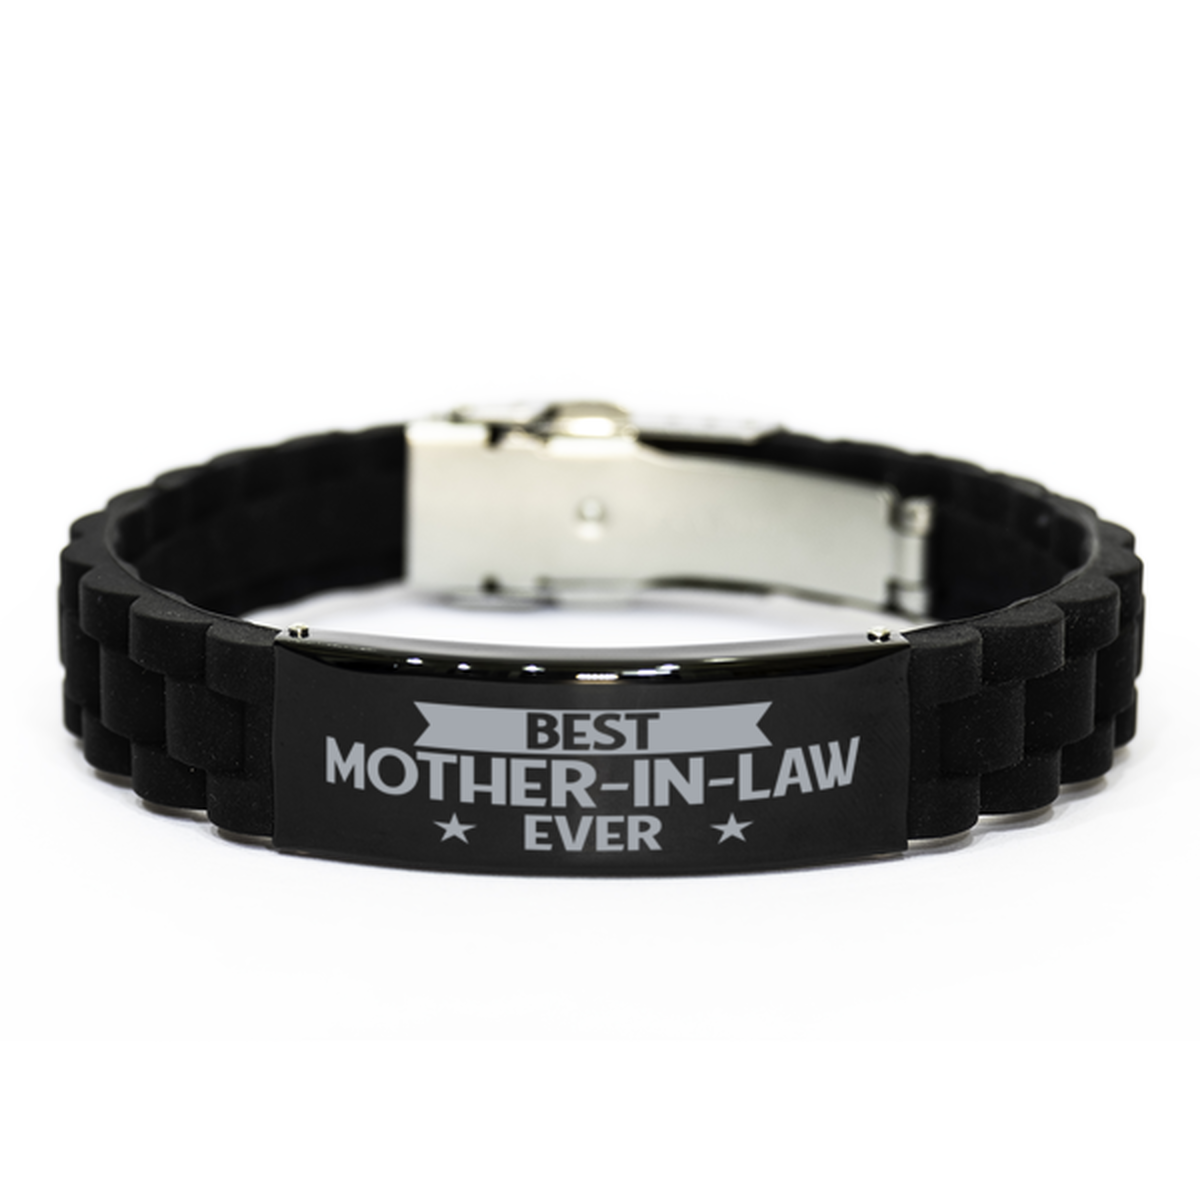 Best Mother-in-law Ever Mother-in-law Gifts, Funny Black Engraved Bracelet For Mother-in-law, Family Gifts For Women